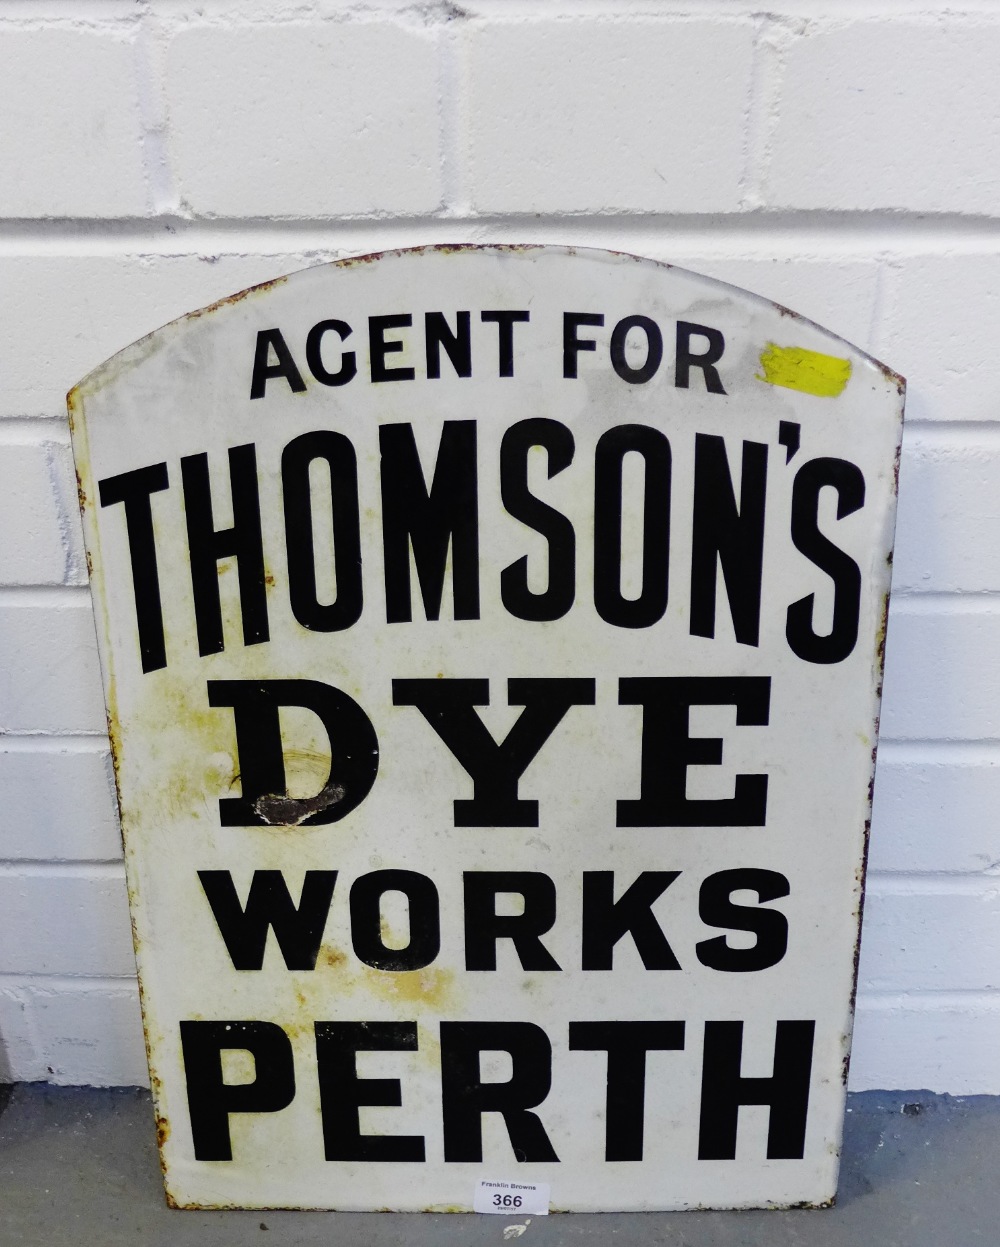 A Thomson's Dye Works, Perth double sided enamel sign